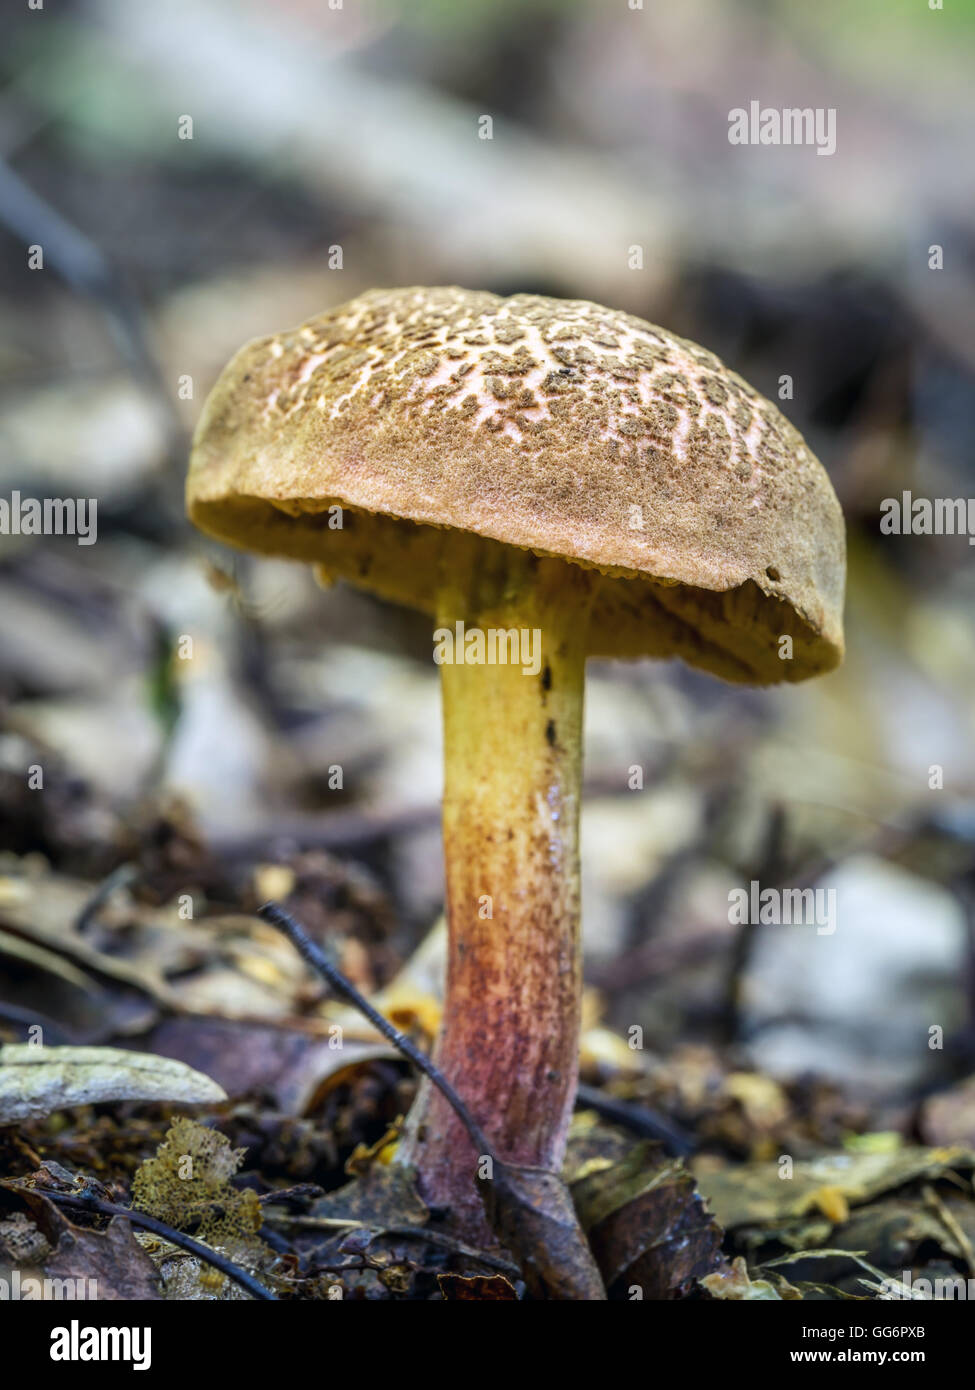 Bay boletus mushroom growing in the forest Stock Photo